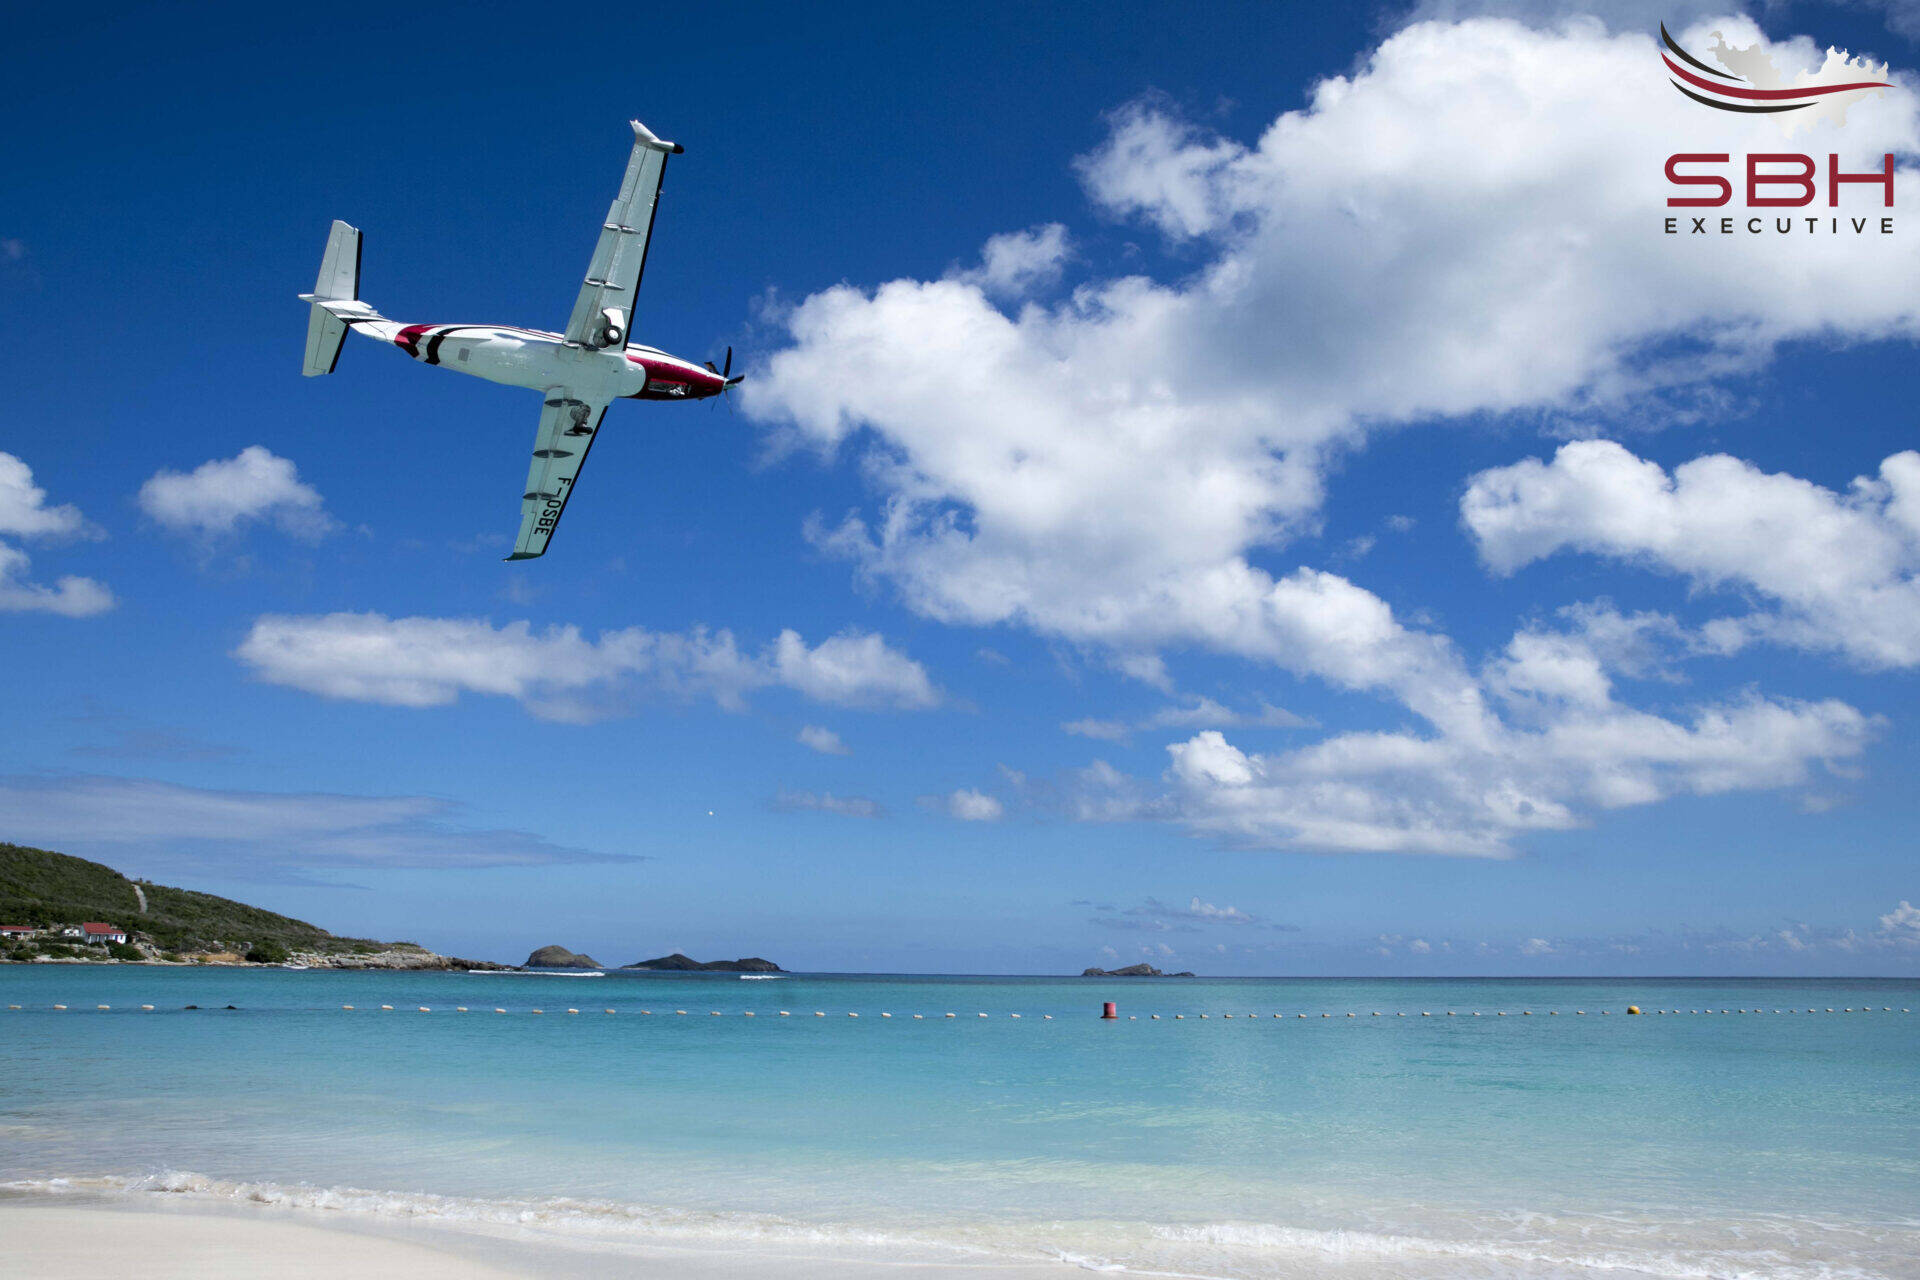 20-st-barth-executive-private-charter-flights-airline-airport.jpg